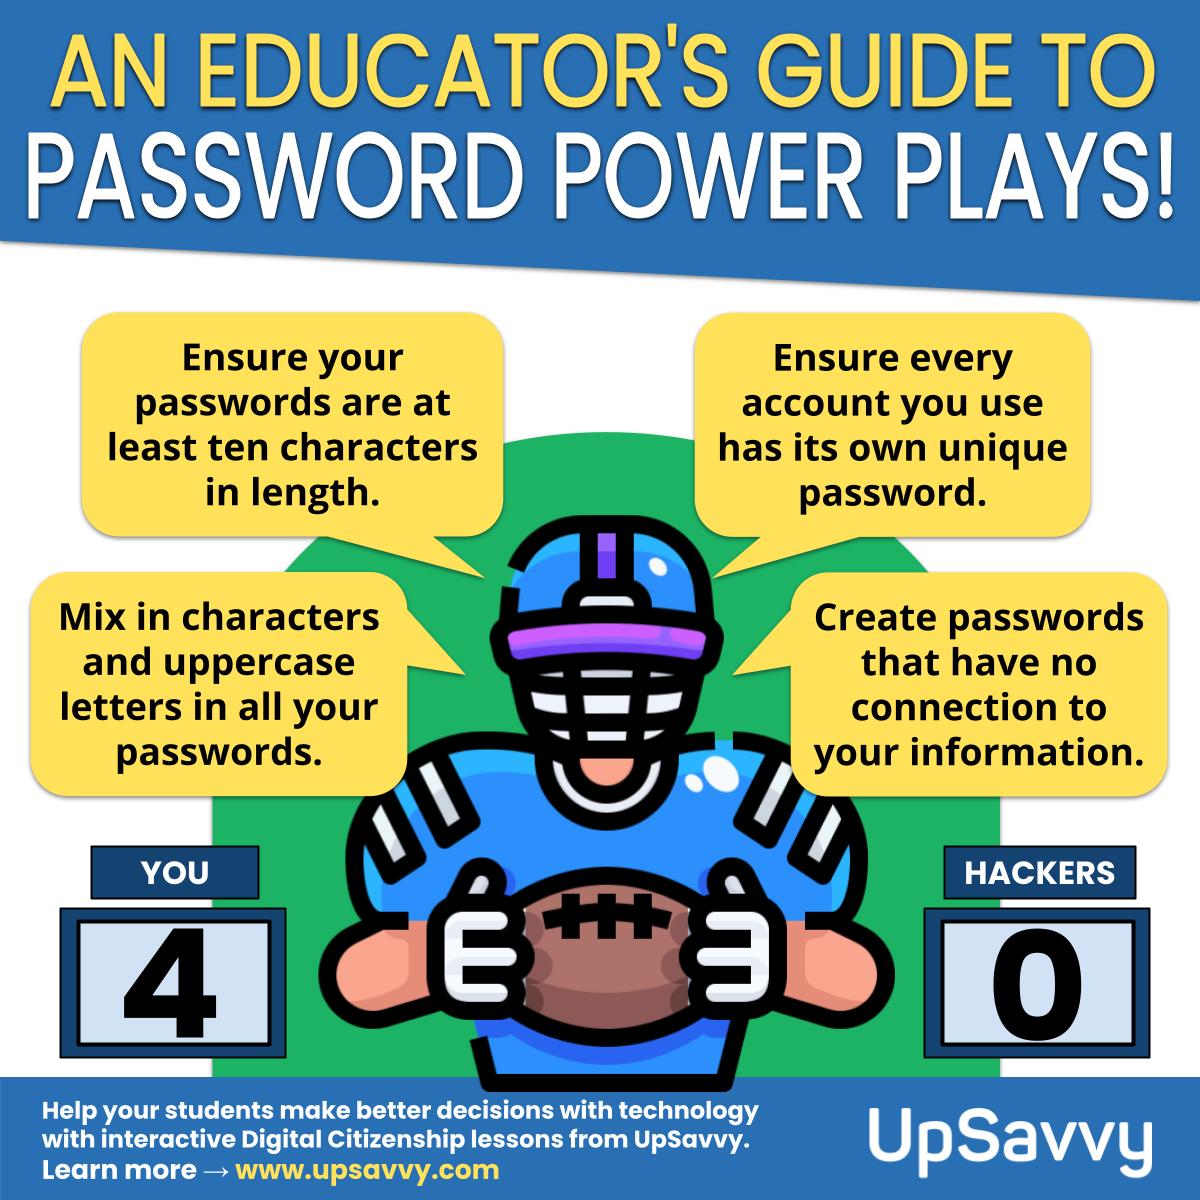 An Educator’s Guide to Password Power Plays